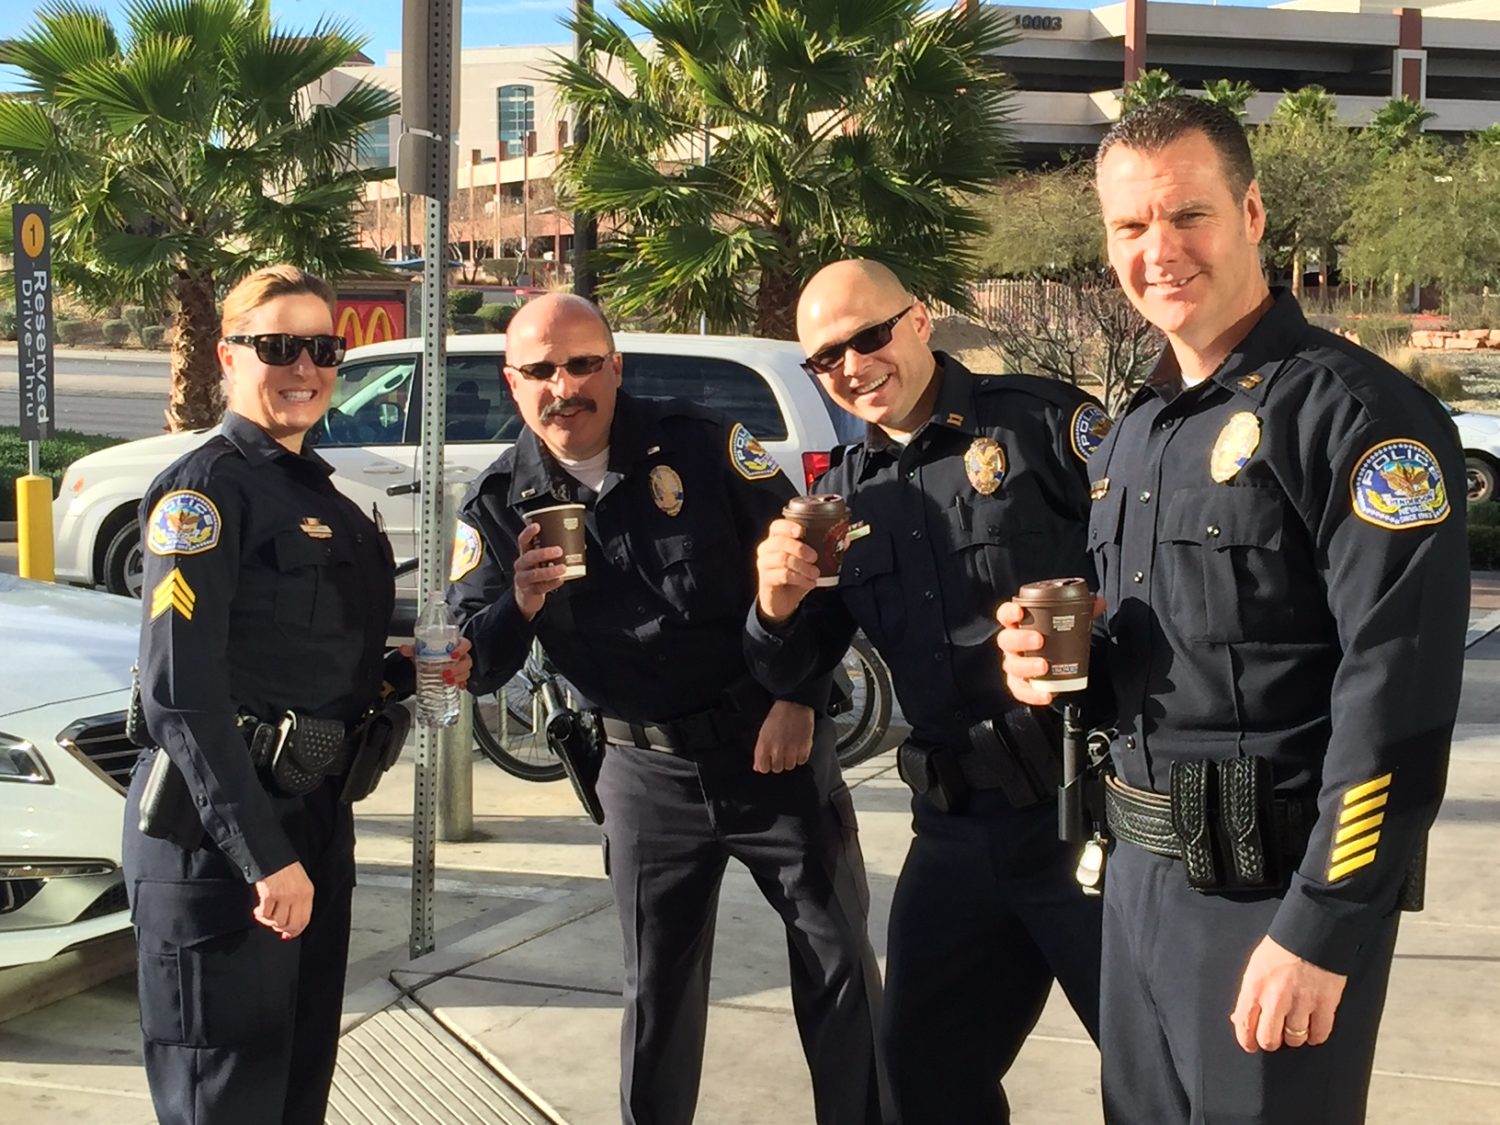 McDonald’s Southern Nevada restaurant locations and members of local law enforcement.